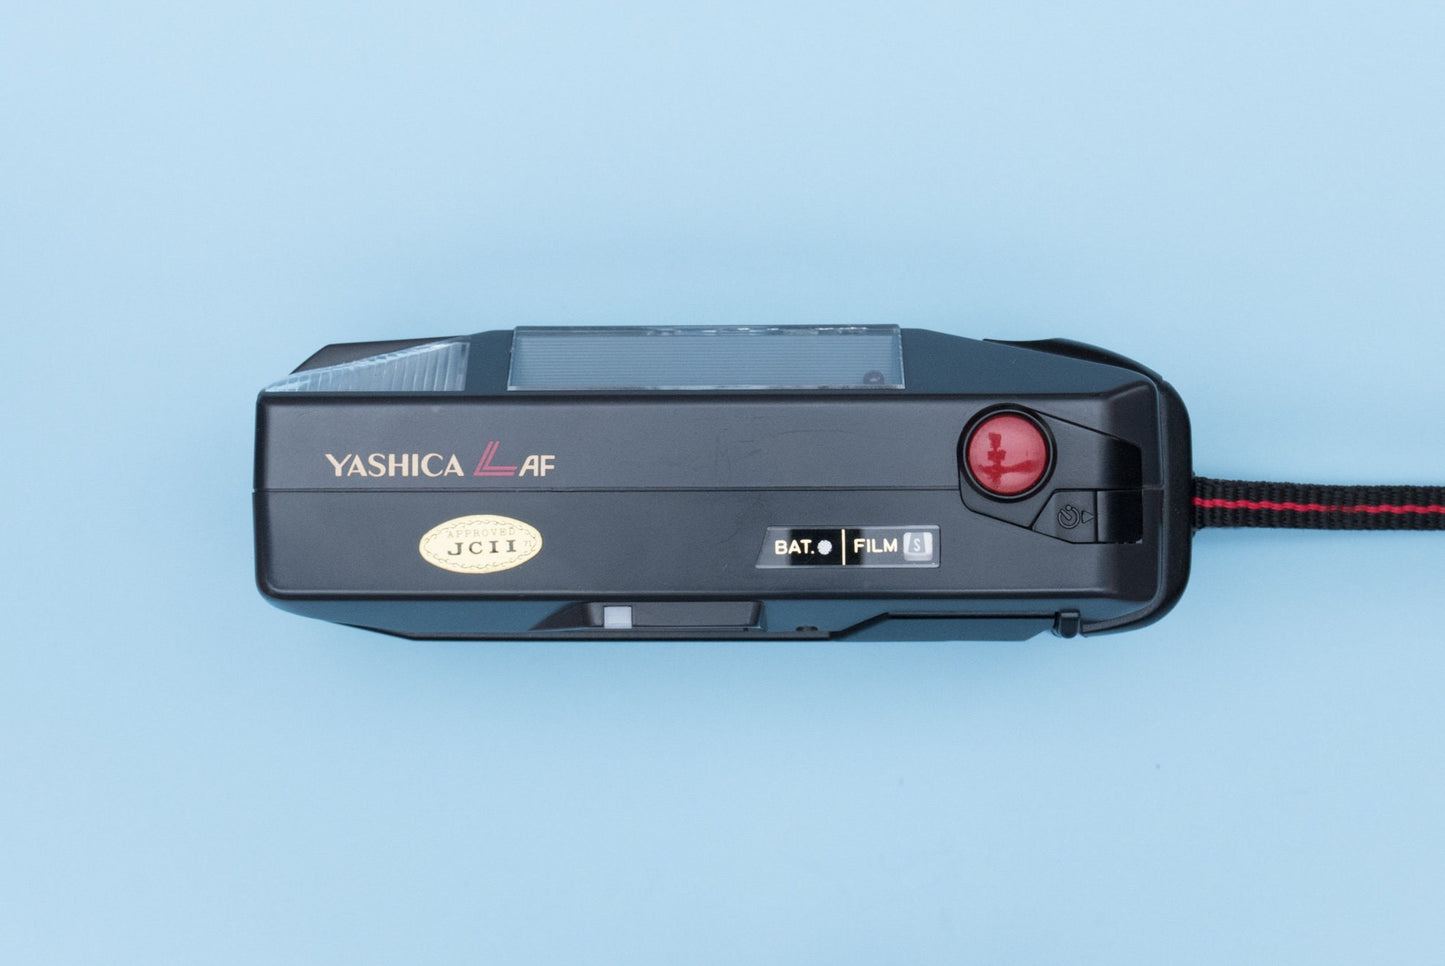 Yashica L AF Point and Shoot 35mm Compact Film Camera